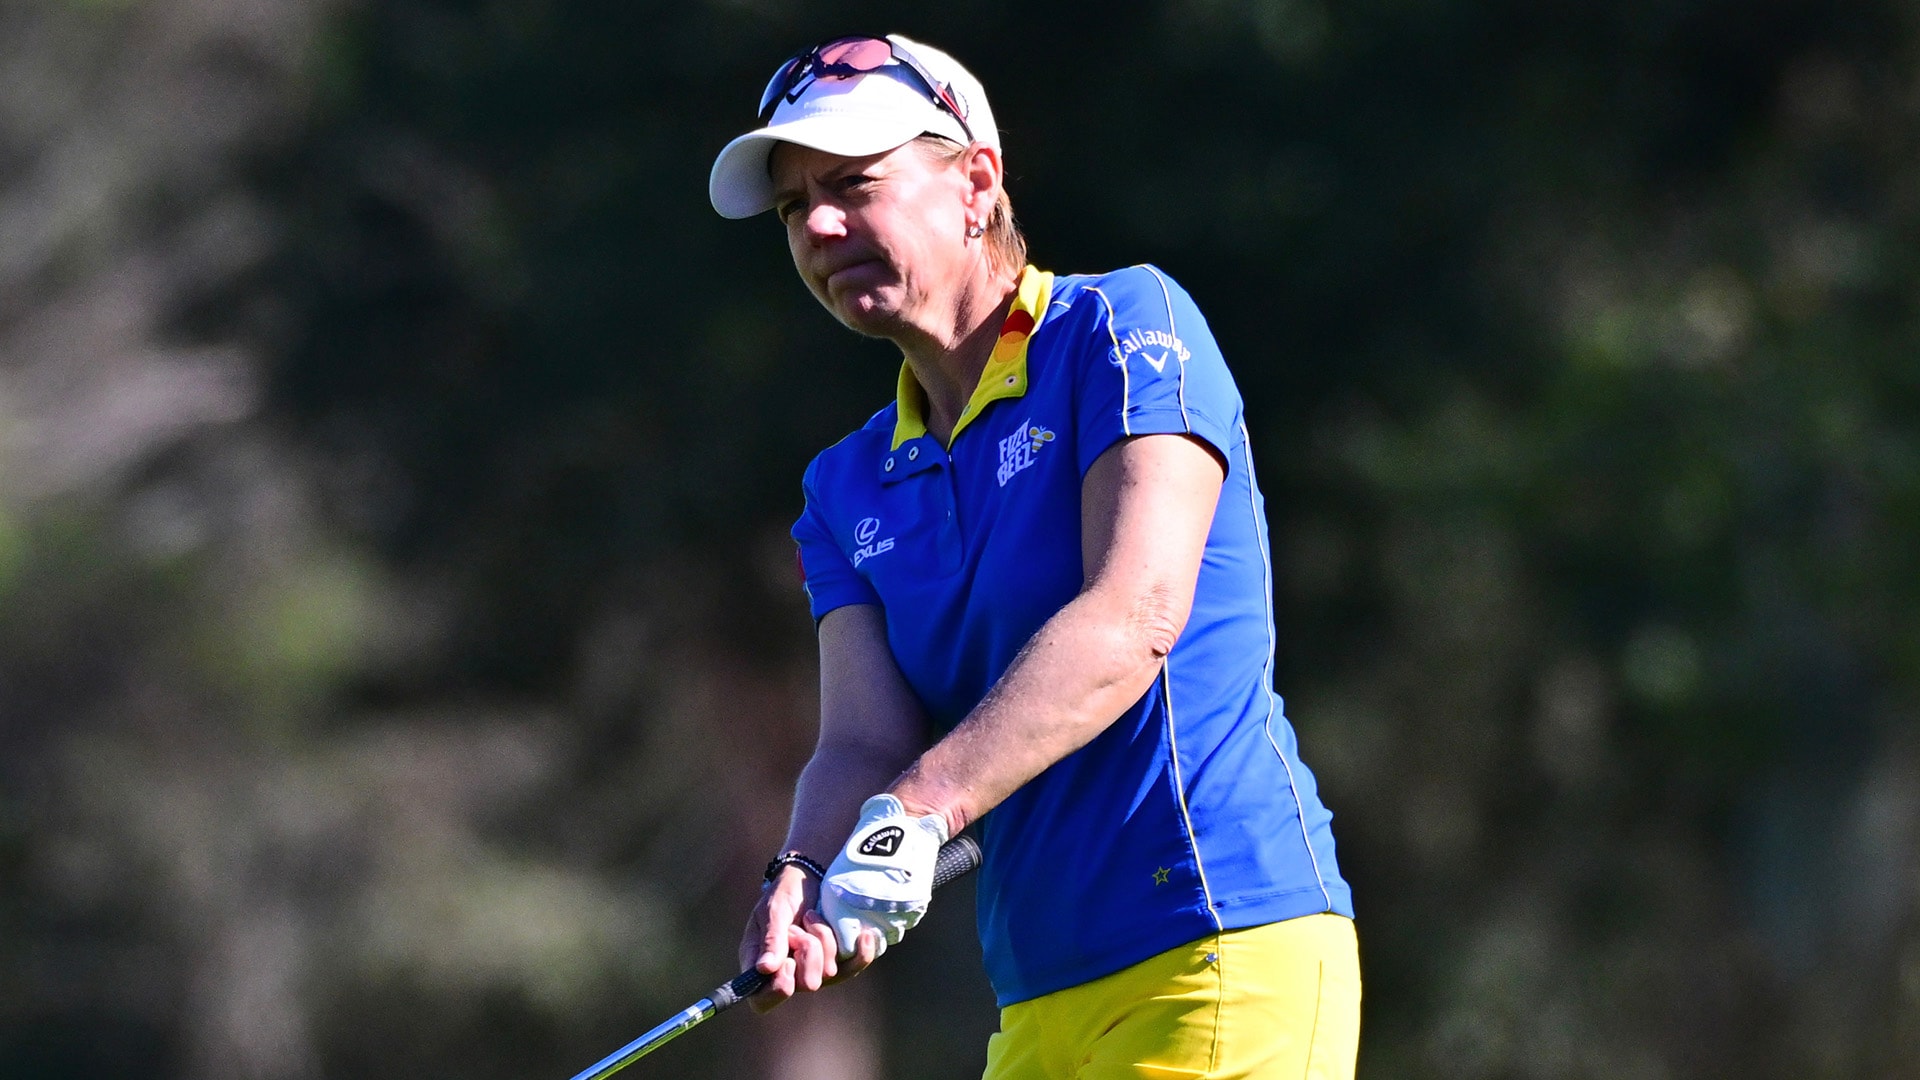 Lake Nona resident Annika Sorenstam opens up lead in TOC's celebrity division 2